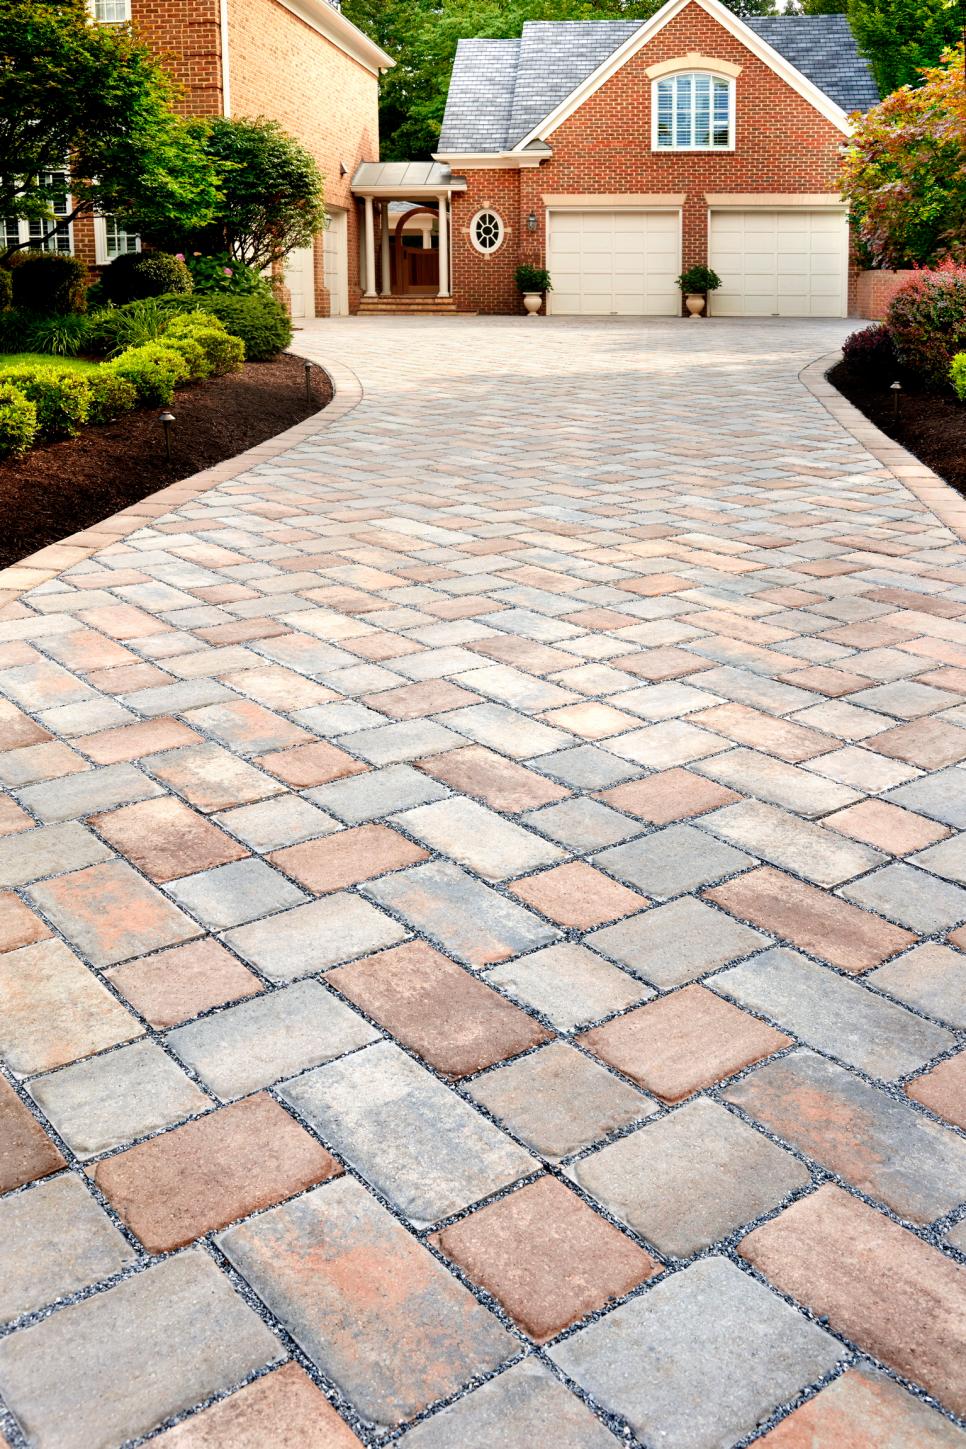 Stone Paver Driveway Brings Warmth and Texture to Home's Exterior | HGTV